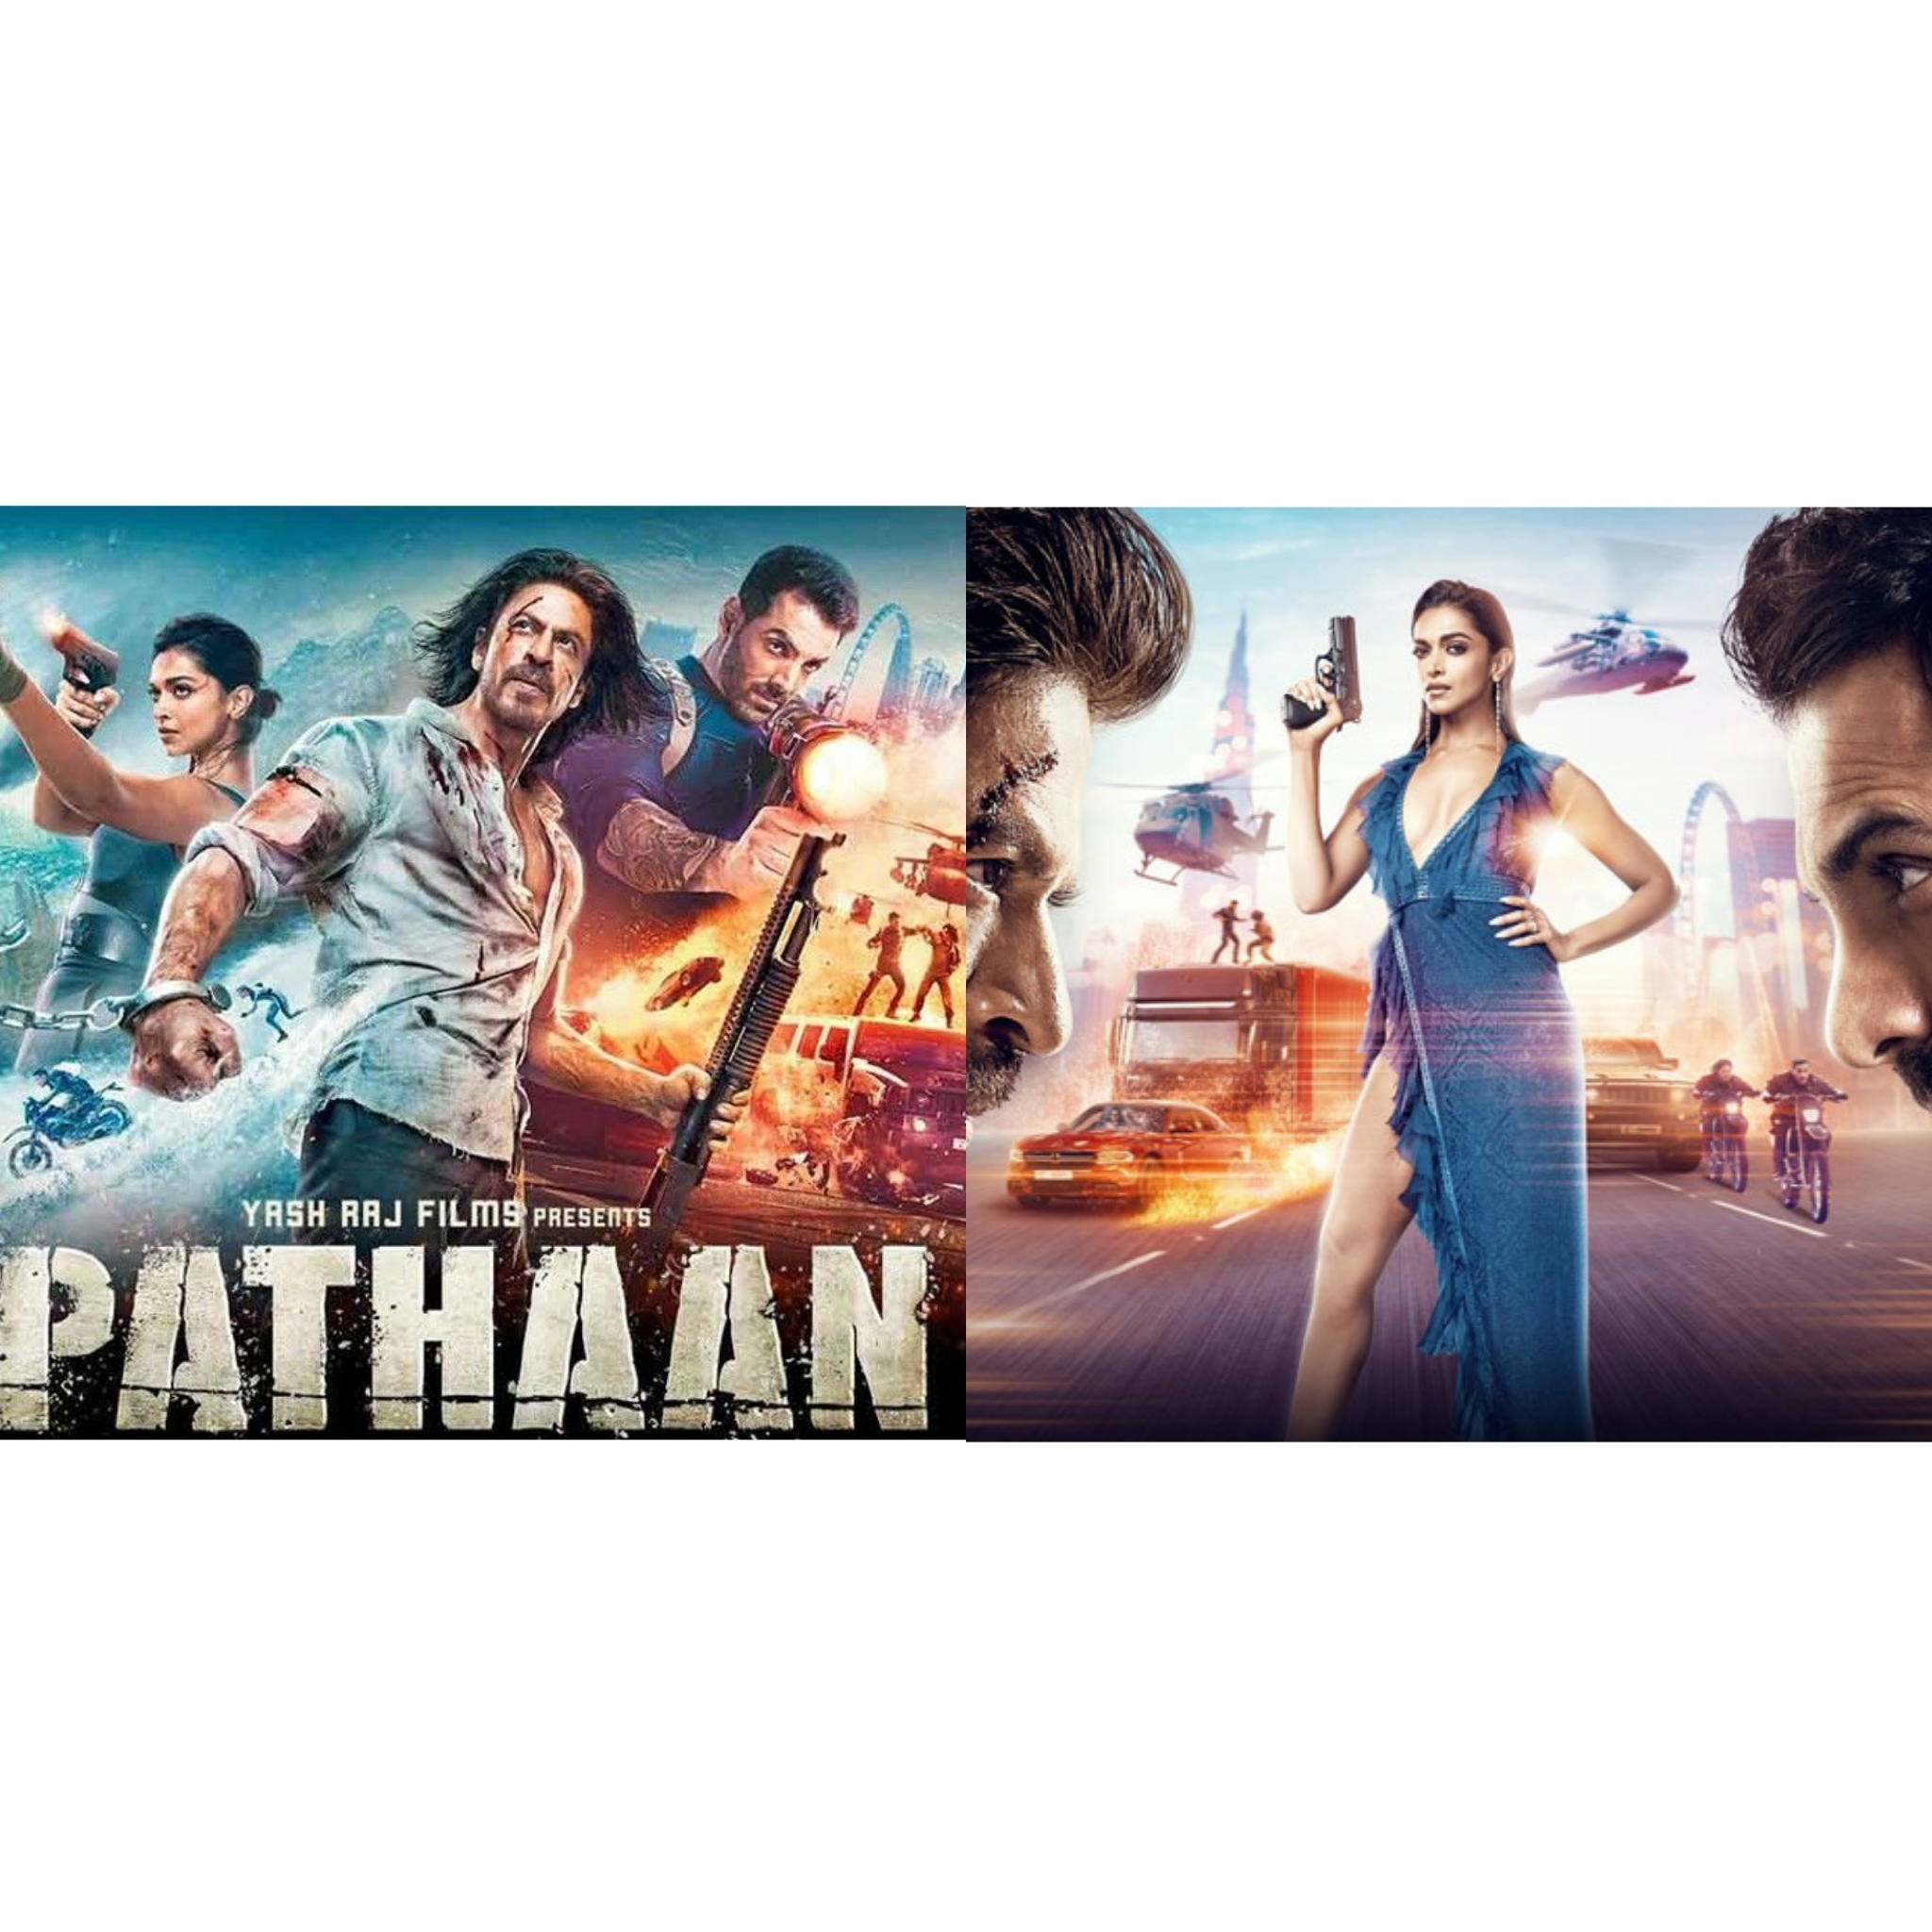 Shahrukh Khan Pathaan Movie Twitter Reviews Revealed